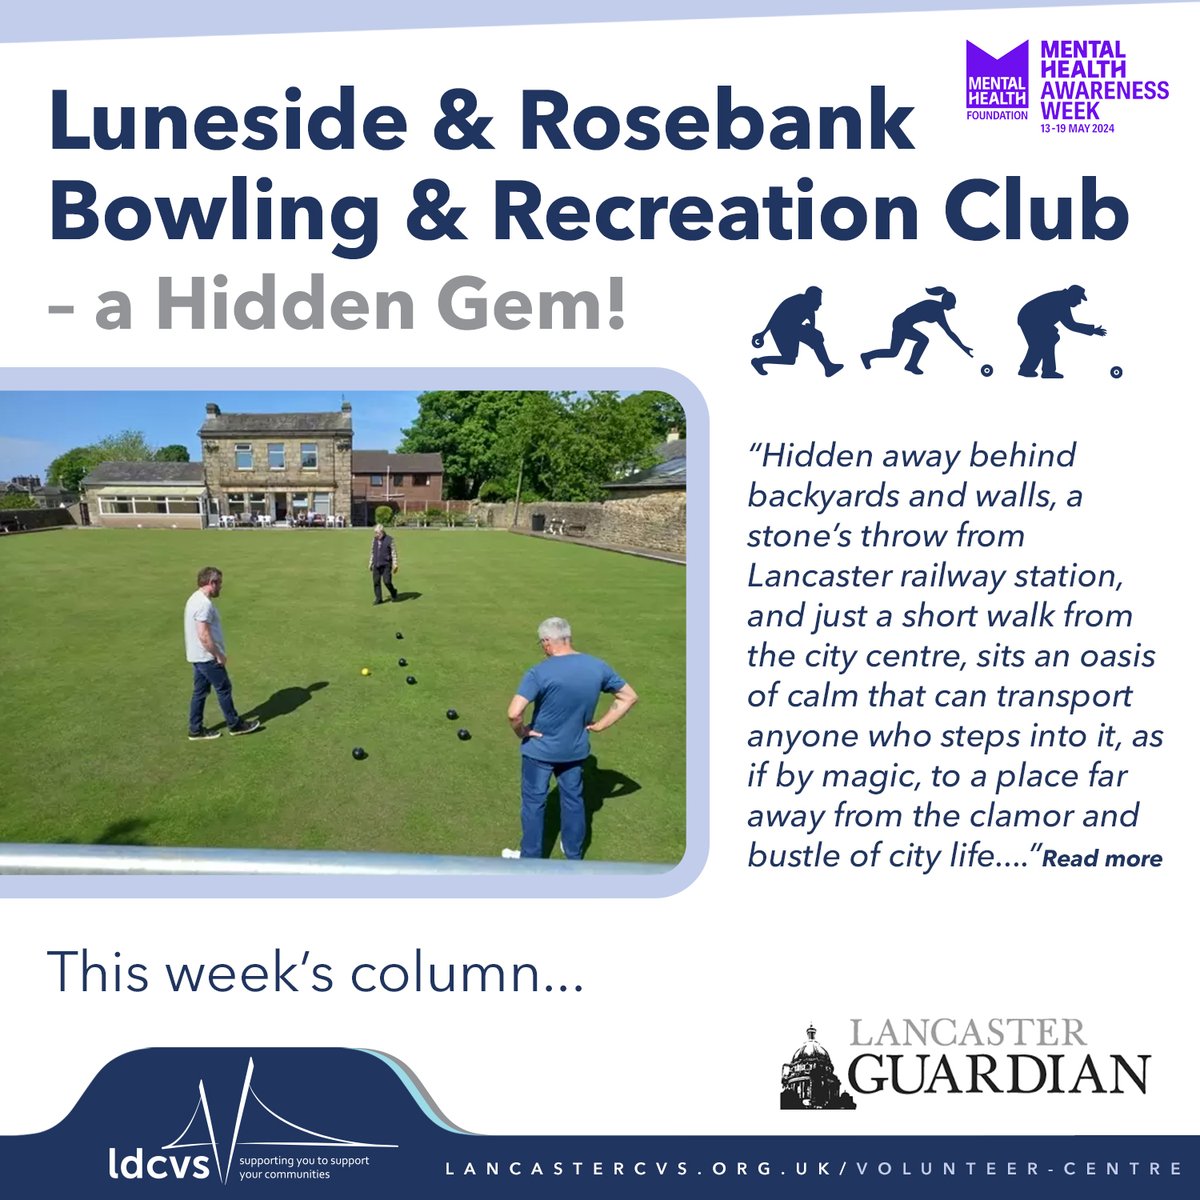 Let's roll with #MentalHealthAwarenessWeek in our latest @GuardianDigital article featuring Luneside & Rosebank Bowling & Recreation Club!🌟 Discover this #hiddengem and embrace the theme of 'moving more' for your well-being. Read more tinyurl.com/fnjsrw8s #CommunitySpotlight